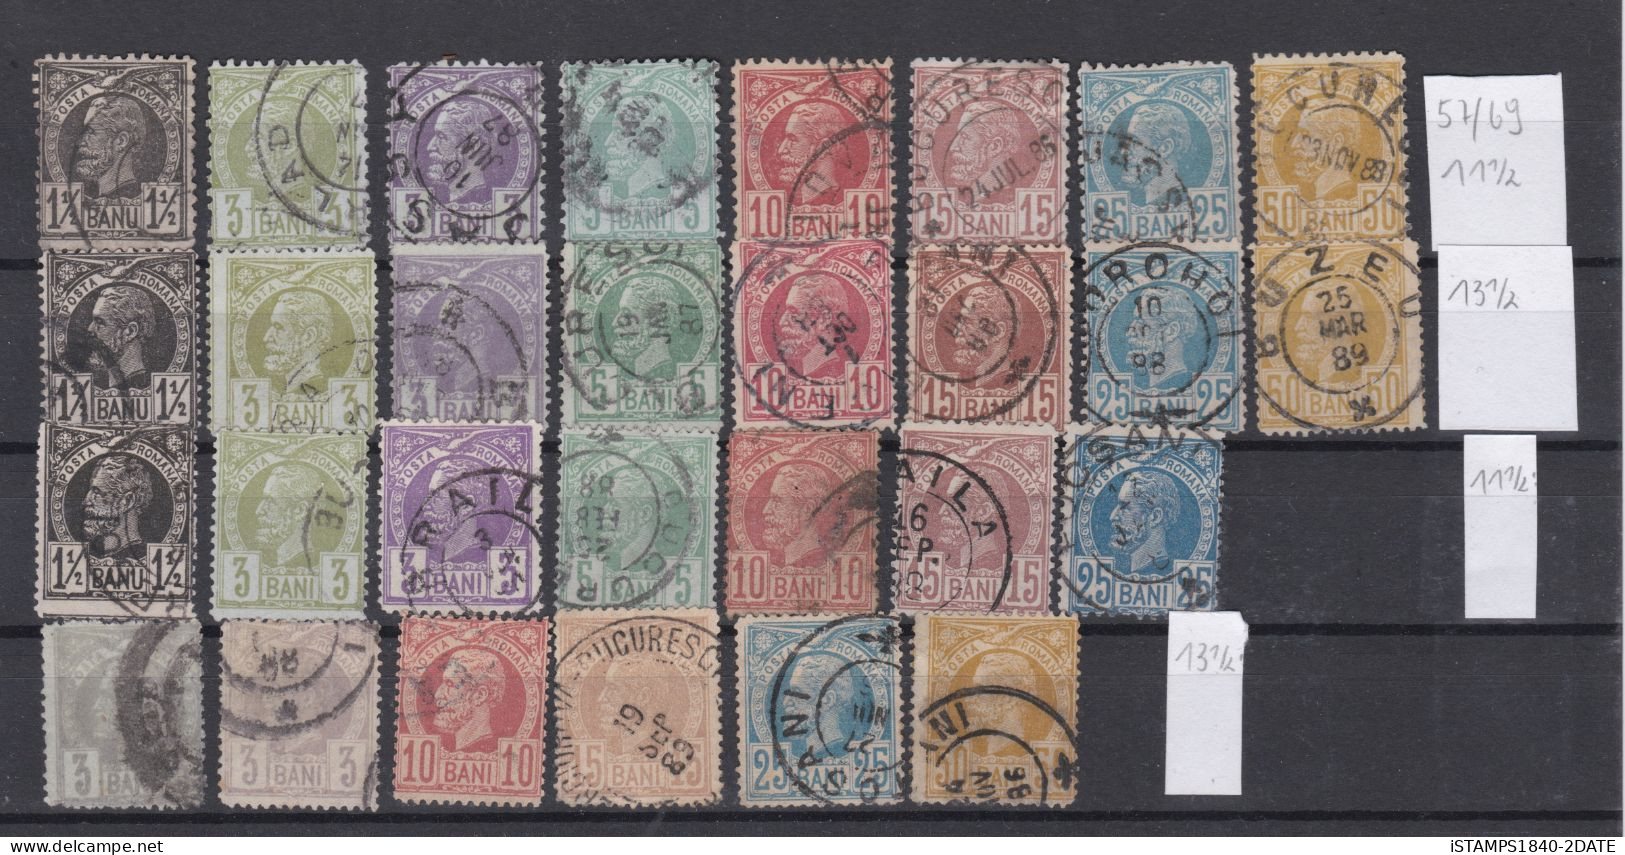 001197/ Romania 1872-1950s Collection Fine Used/ Used (450) Large Cat Value